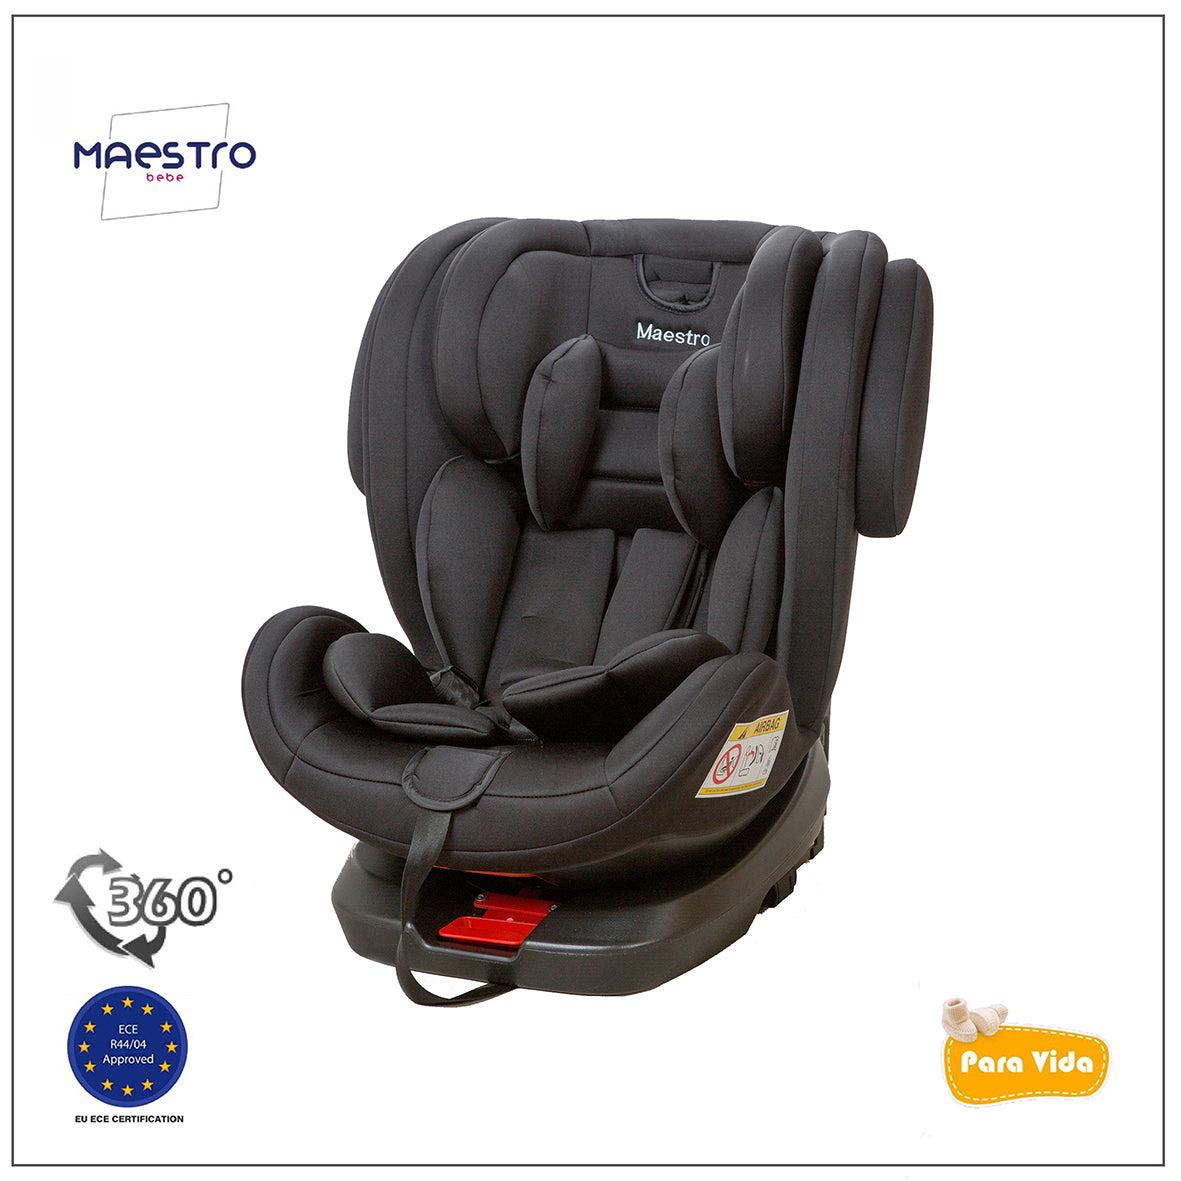 Maestro Bebe - ALL in ONE Car Seat